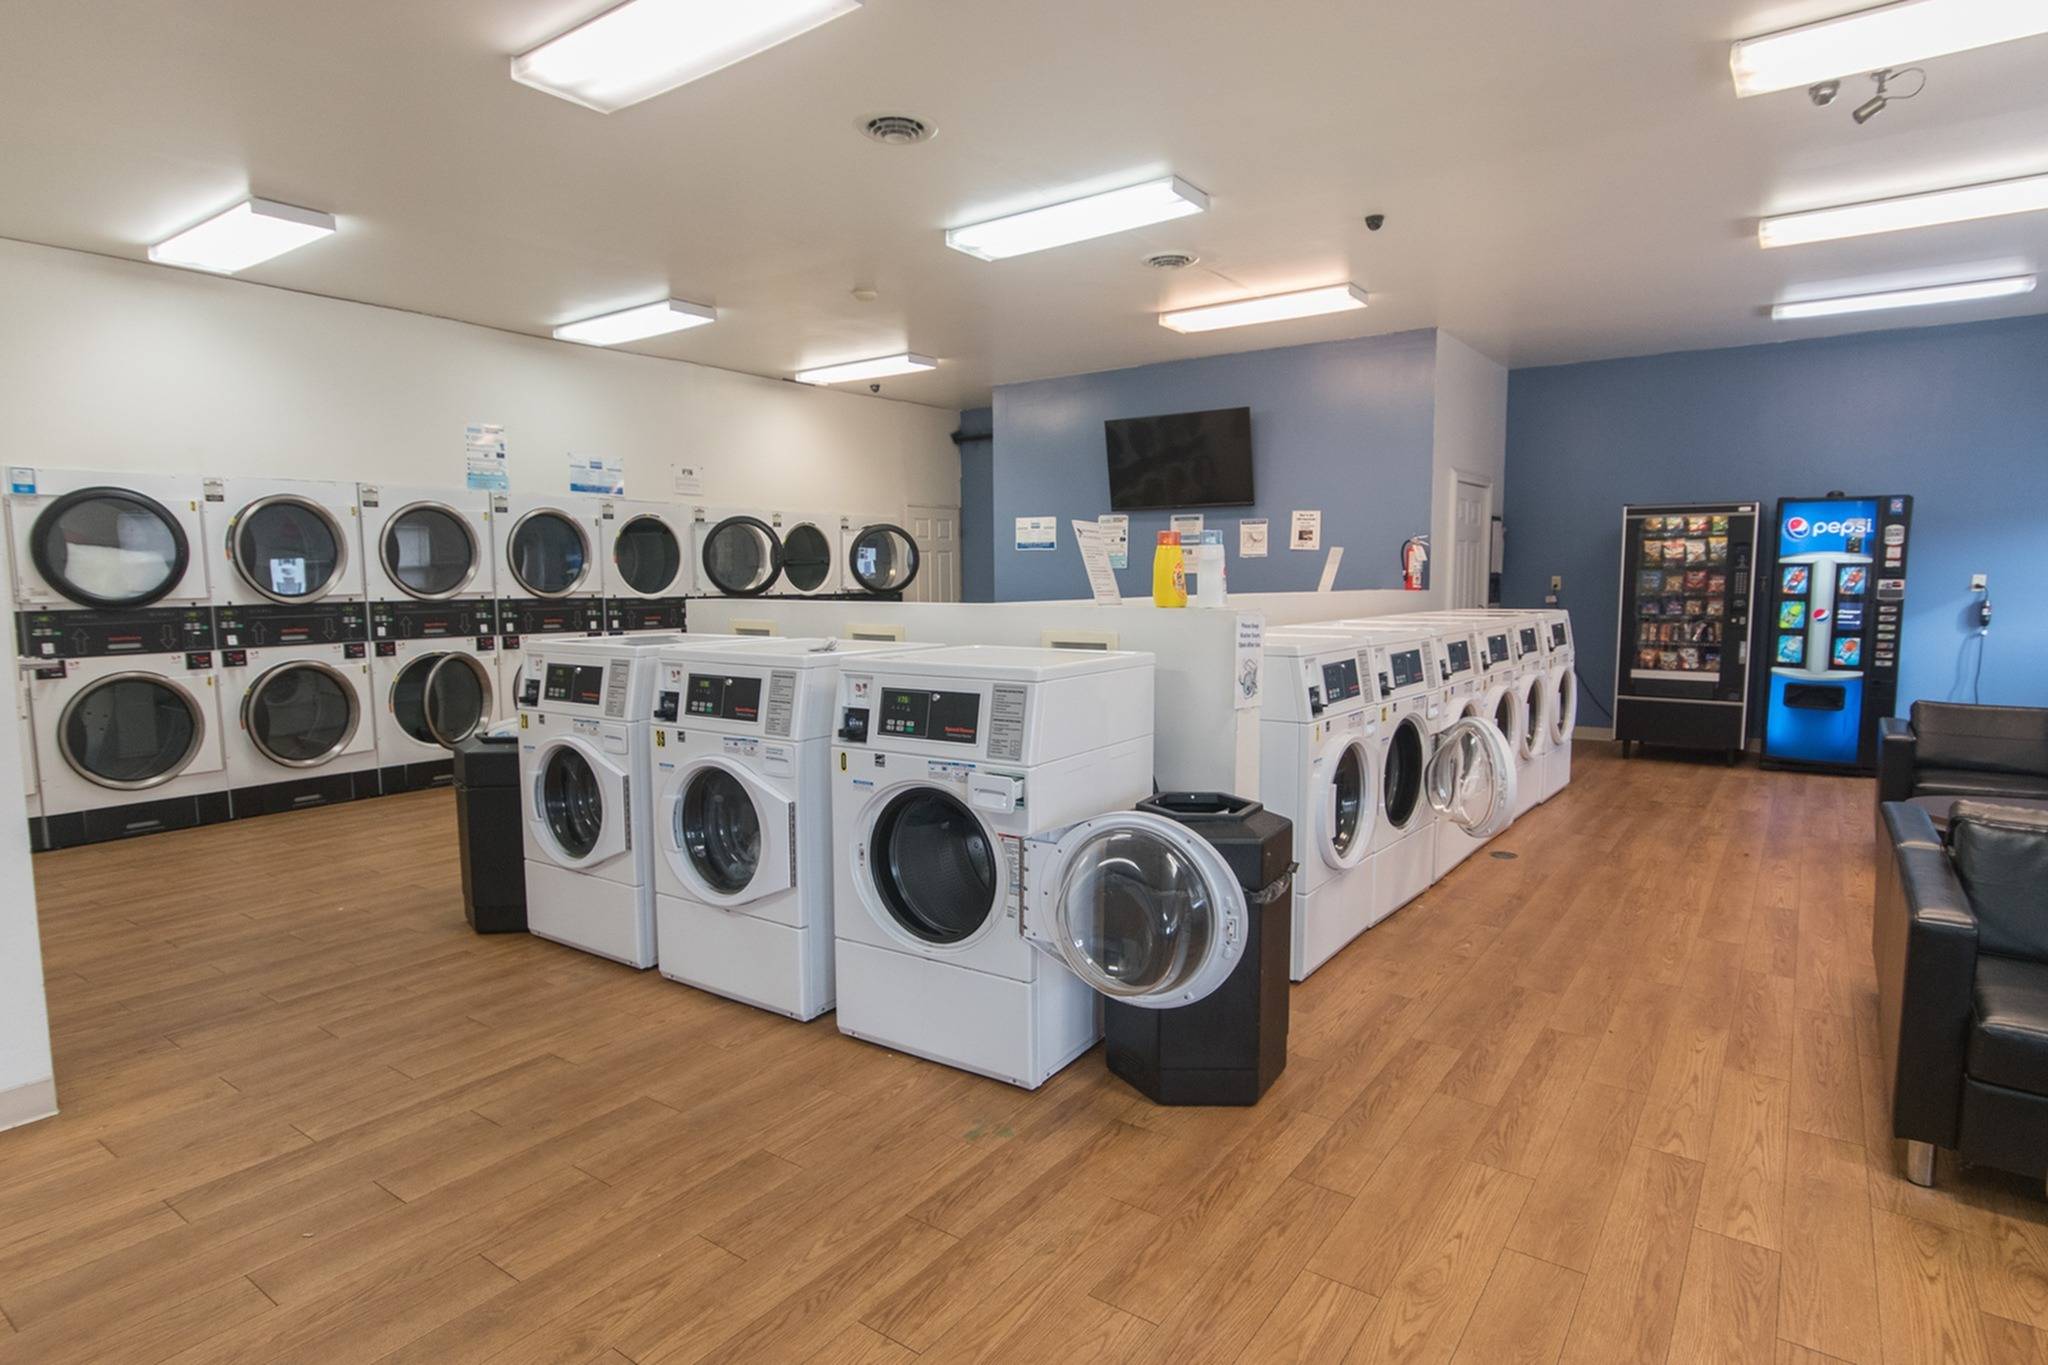 Several washer and dryers along with couches and vending machines.